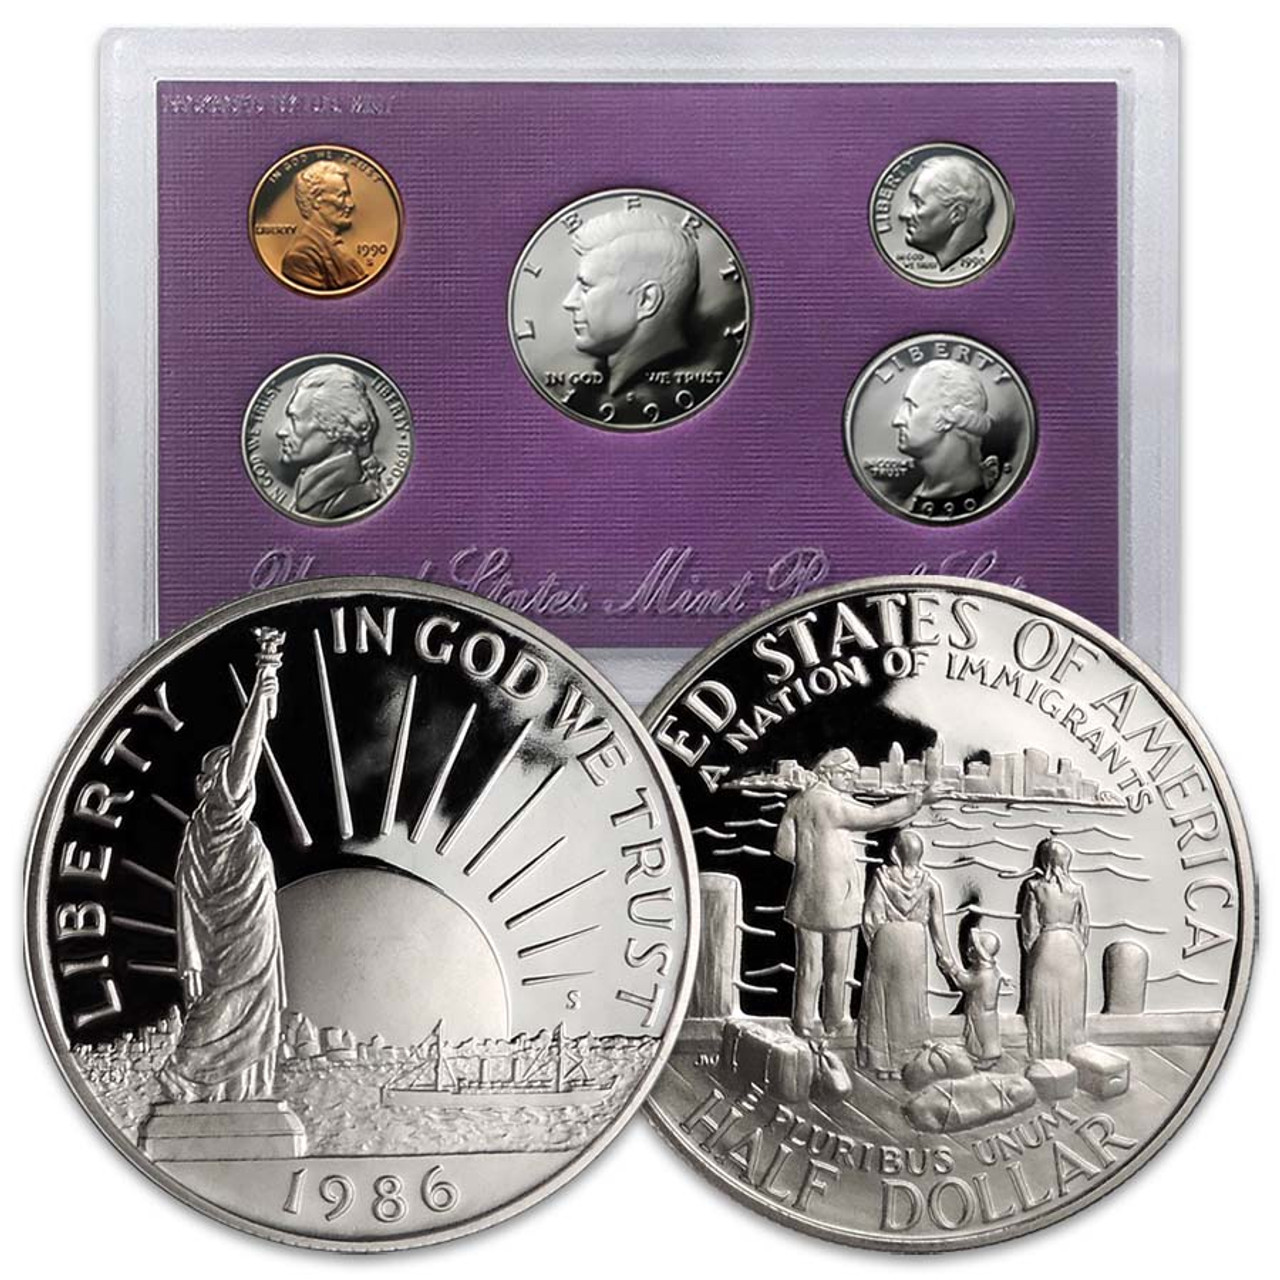 FREE Proof Set with a Statue of Liberty Half Dollar Proof